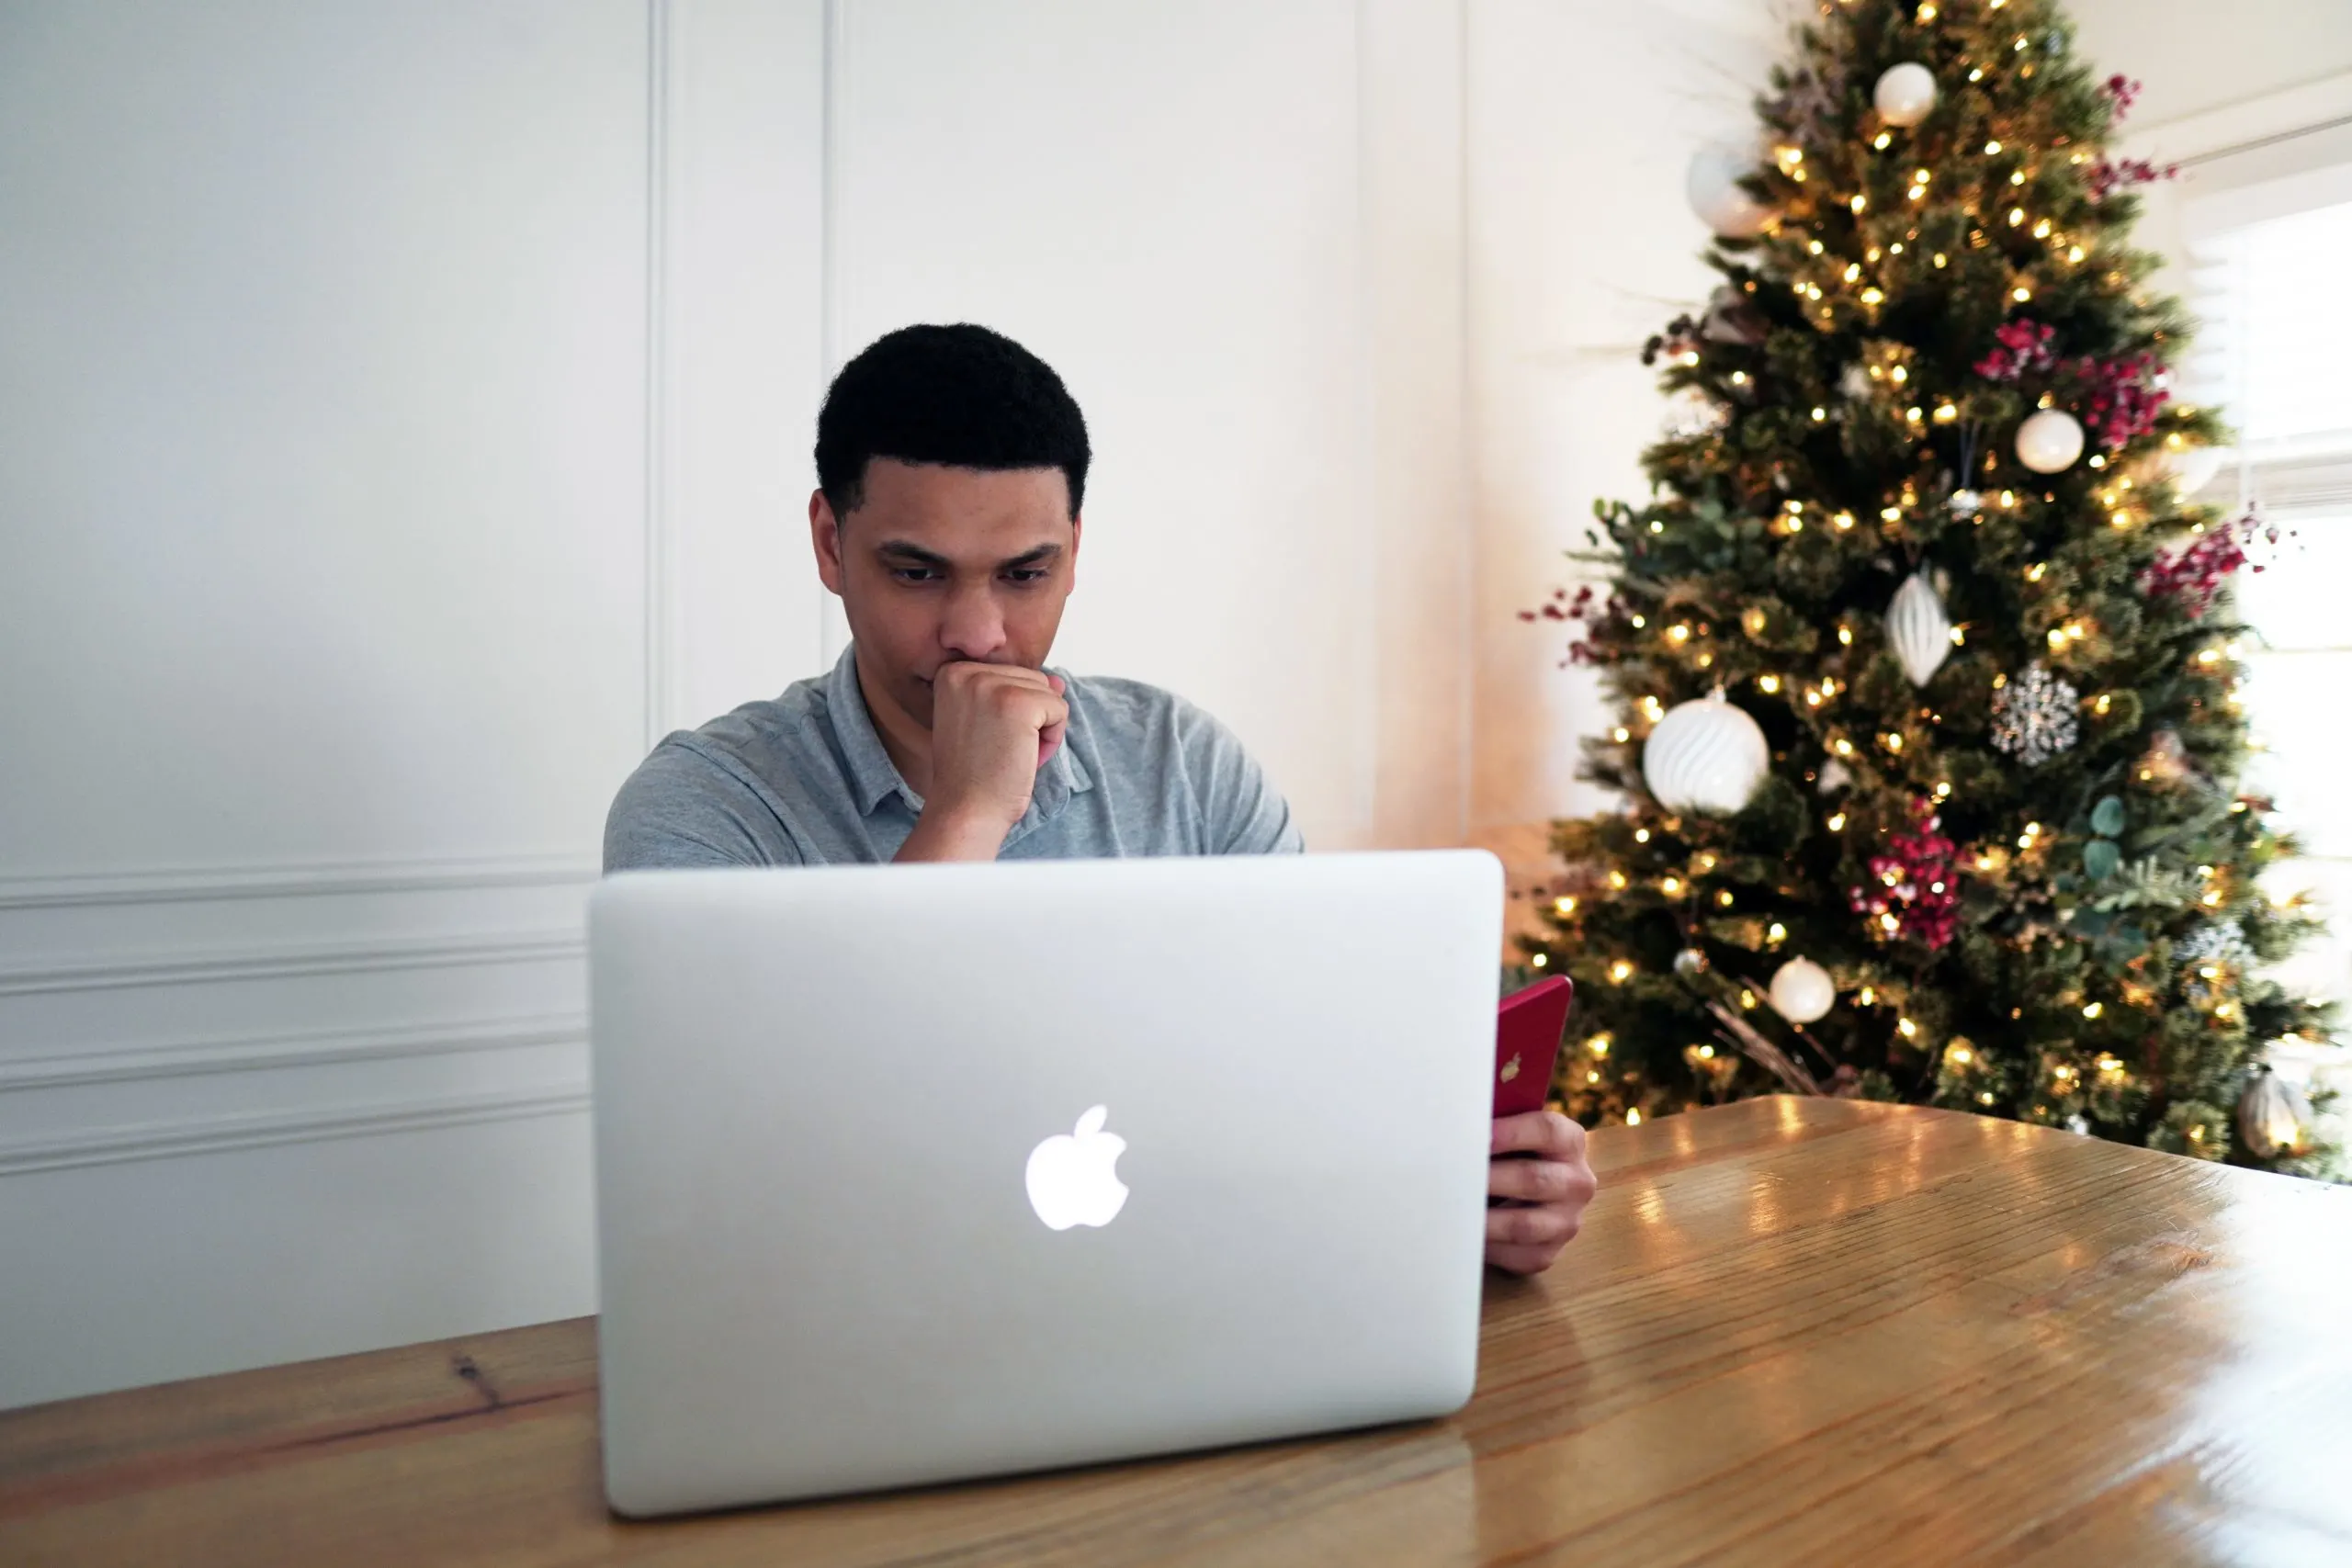 photo of man at laptop in front of a Christmas tree in article about i need help but i don't know what to do